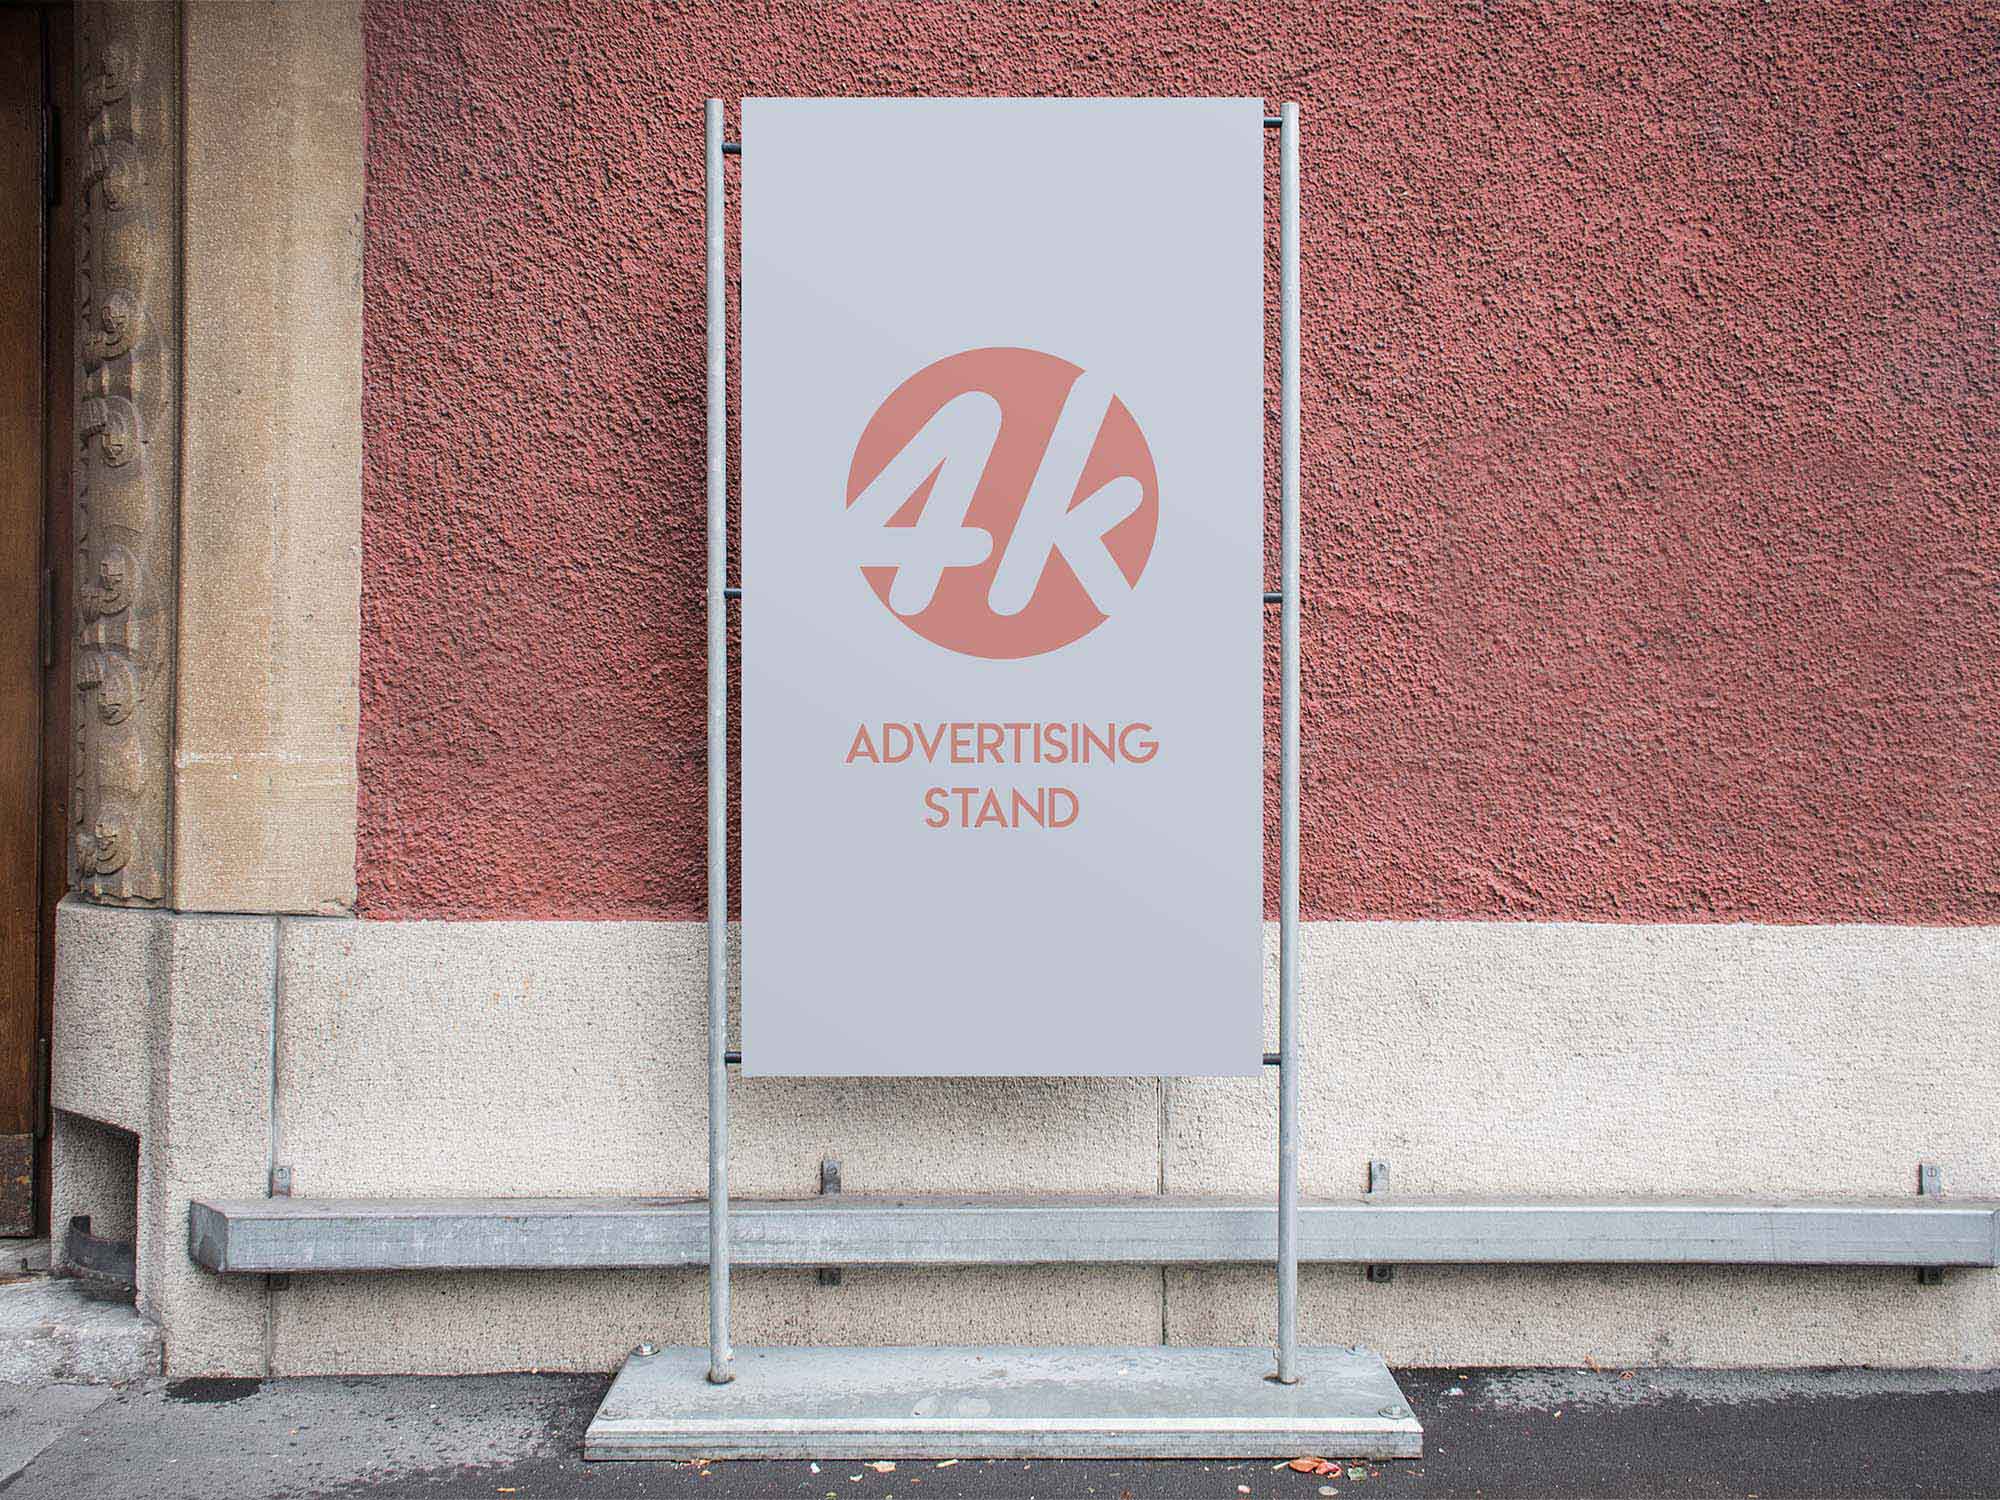 New Vertical Advertising Stand Mockup